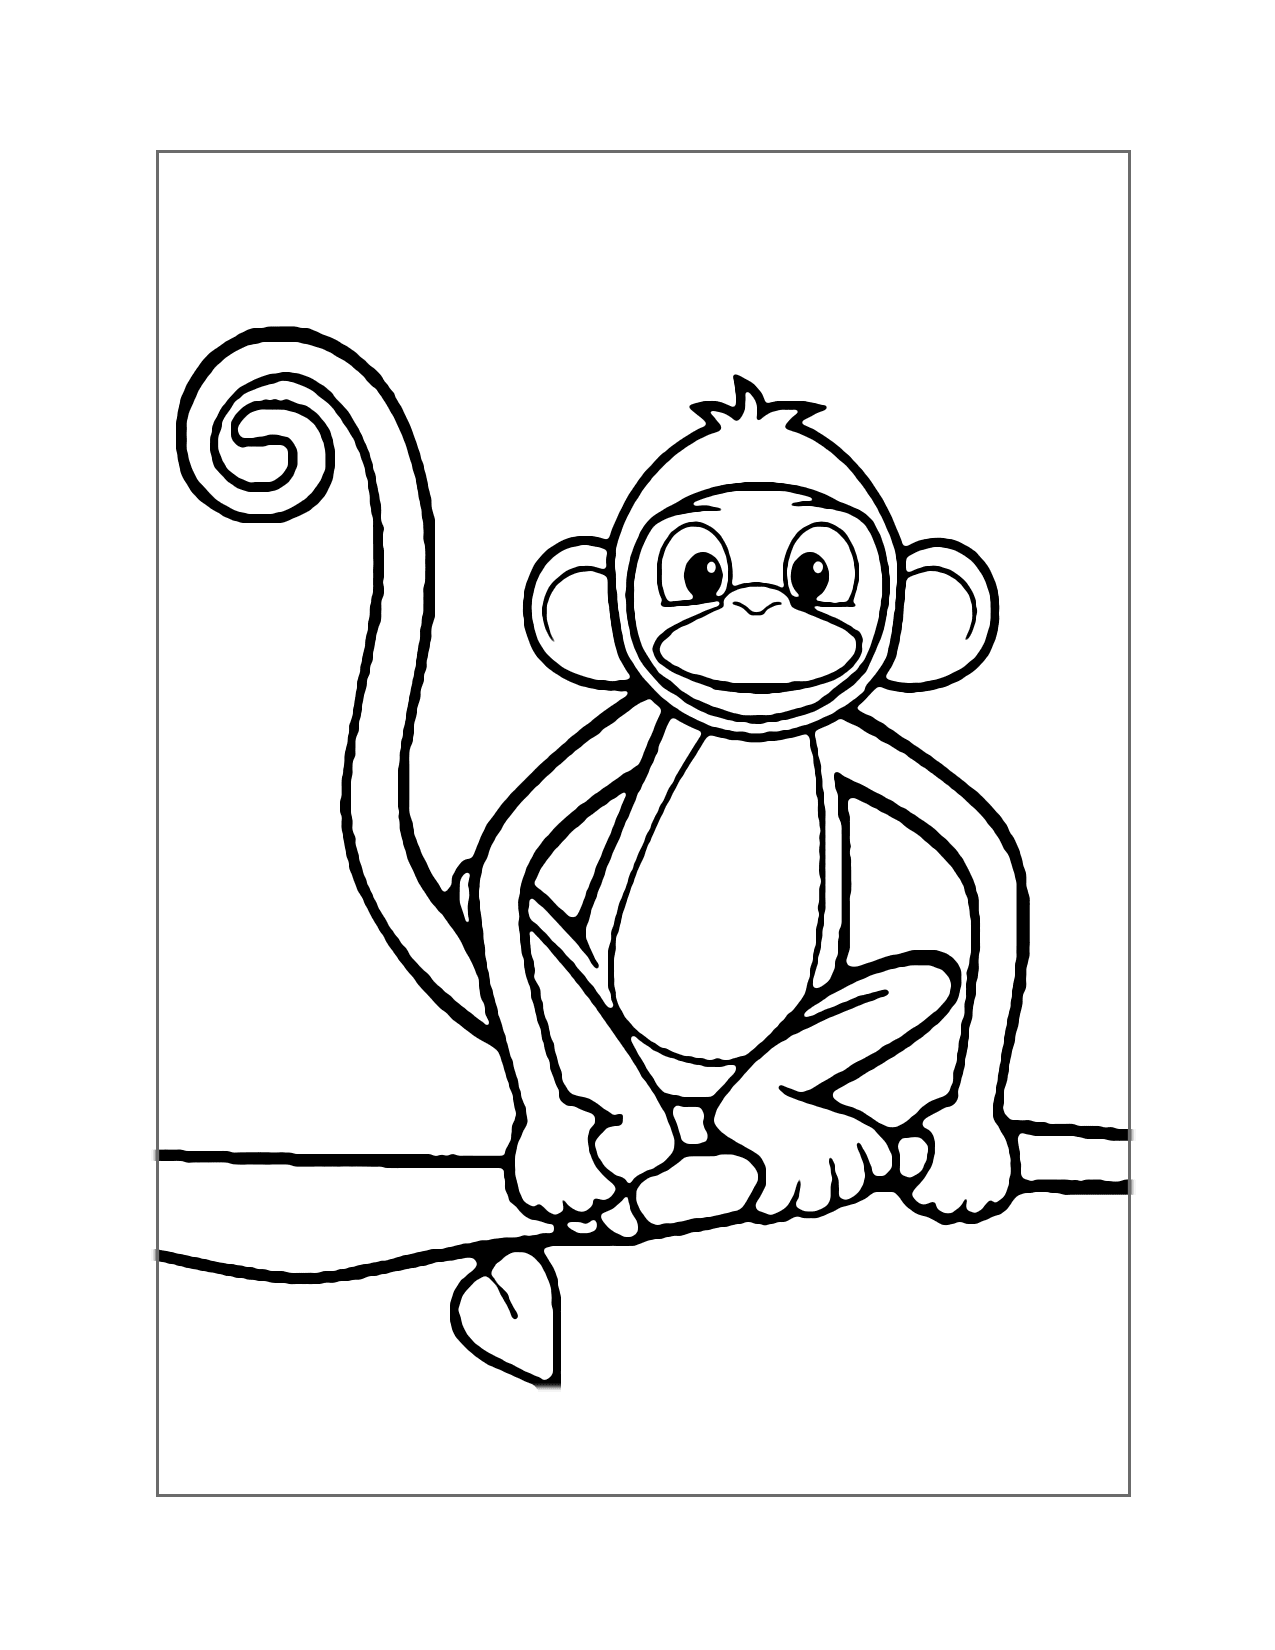 Super Cute Monkey In A Tree Coloring Page